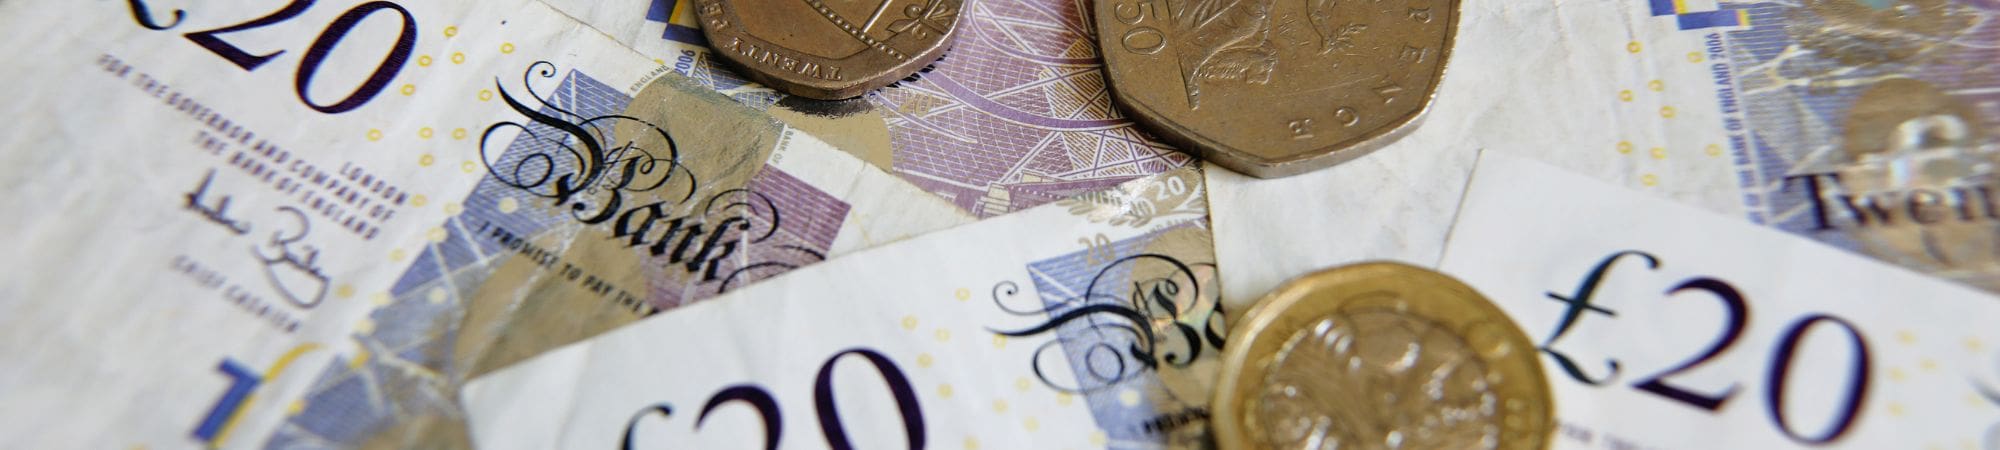 UK Economy Falls Into Recession – What Does It Mean For Consumer Spending?